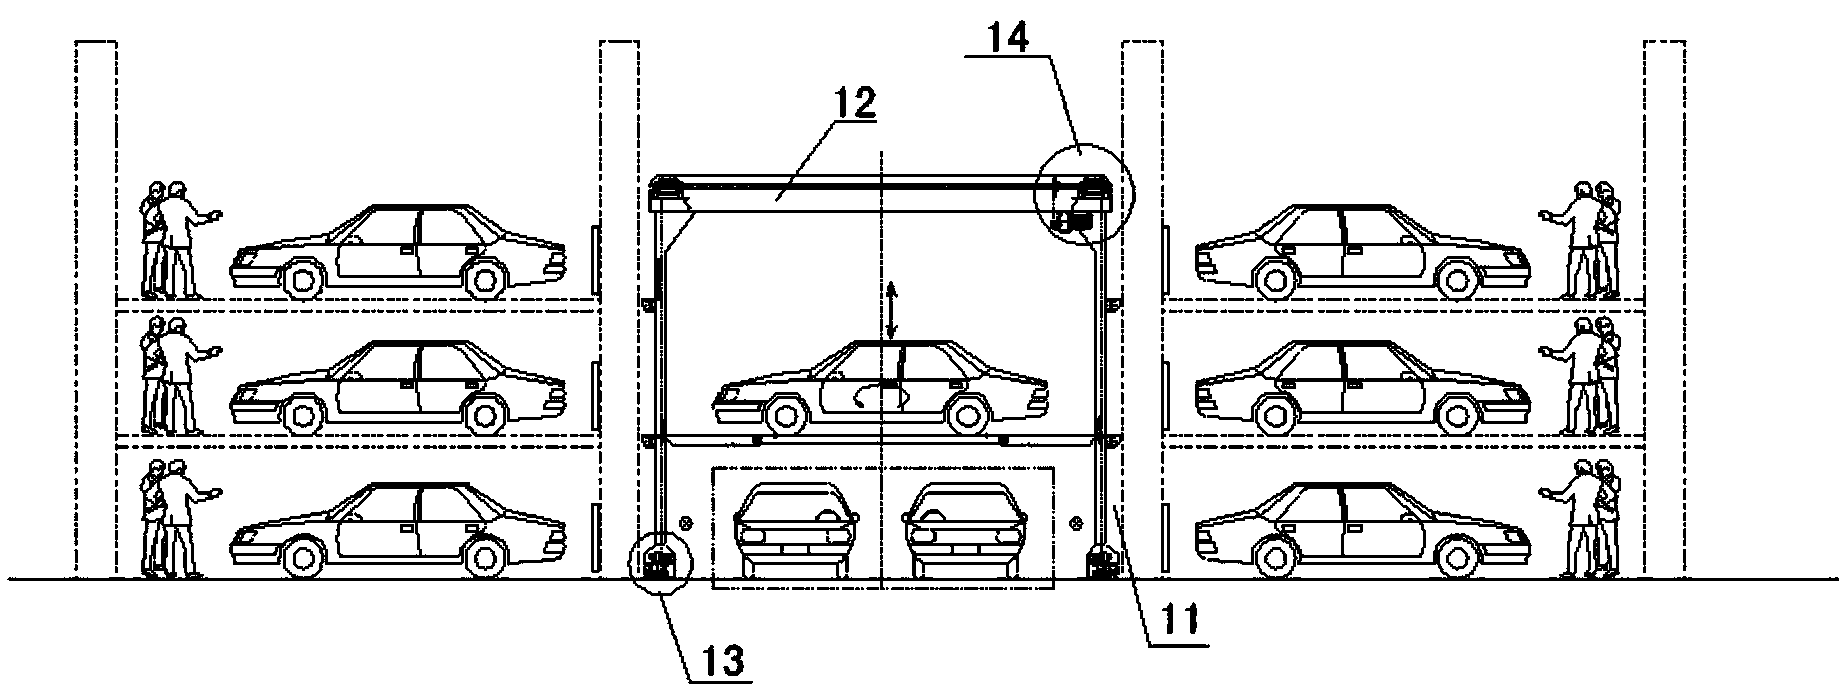 Parallel type vehicle carrying robot and parking equipment